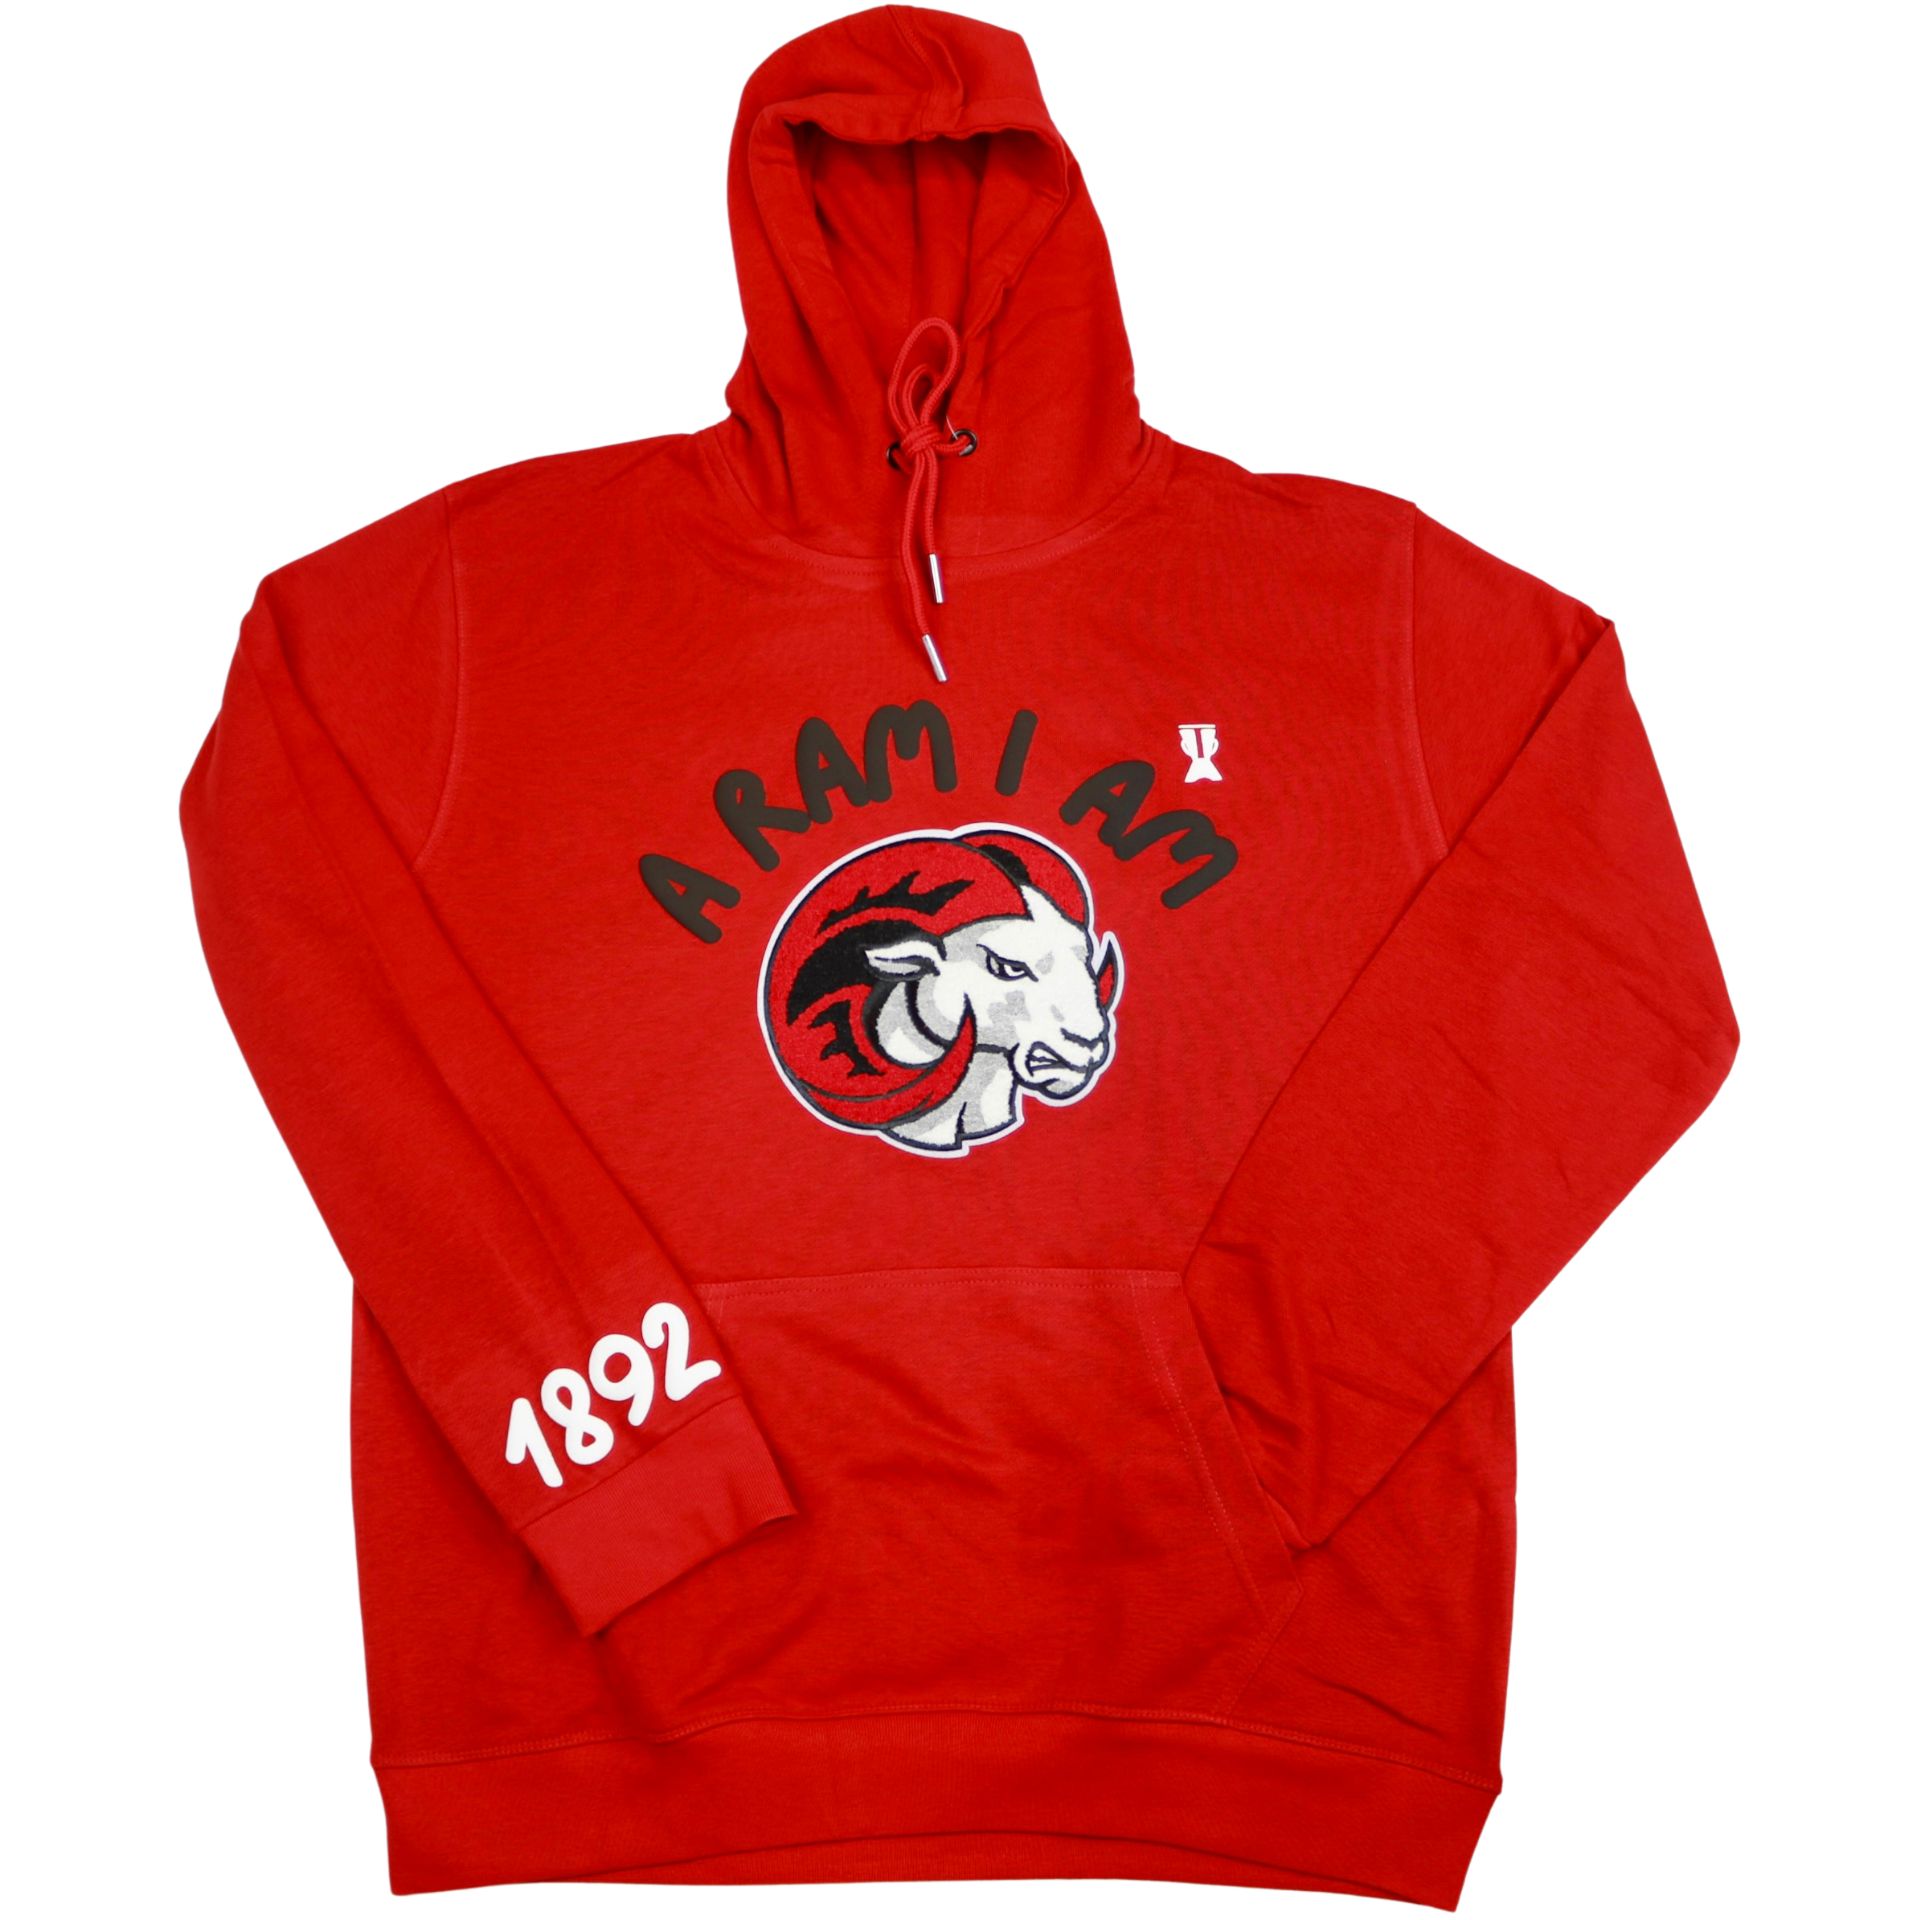 "A RAM I AM" PUFF CHENILLE EMBROIDERY HOODIE (RED)